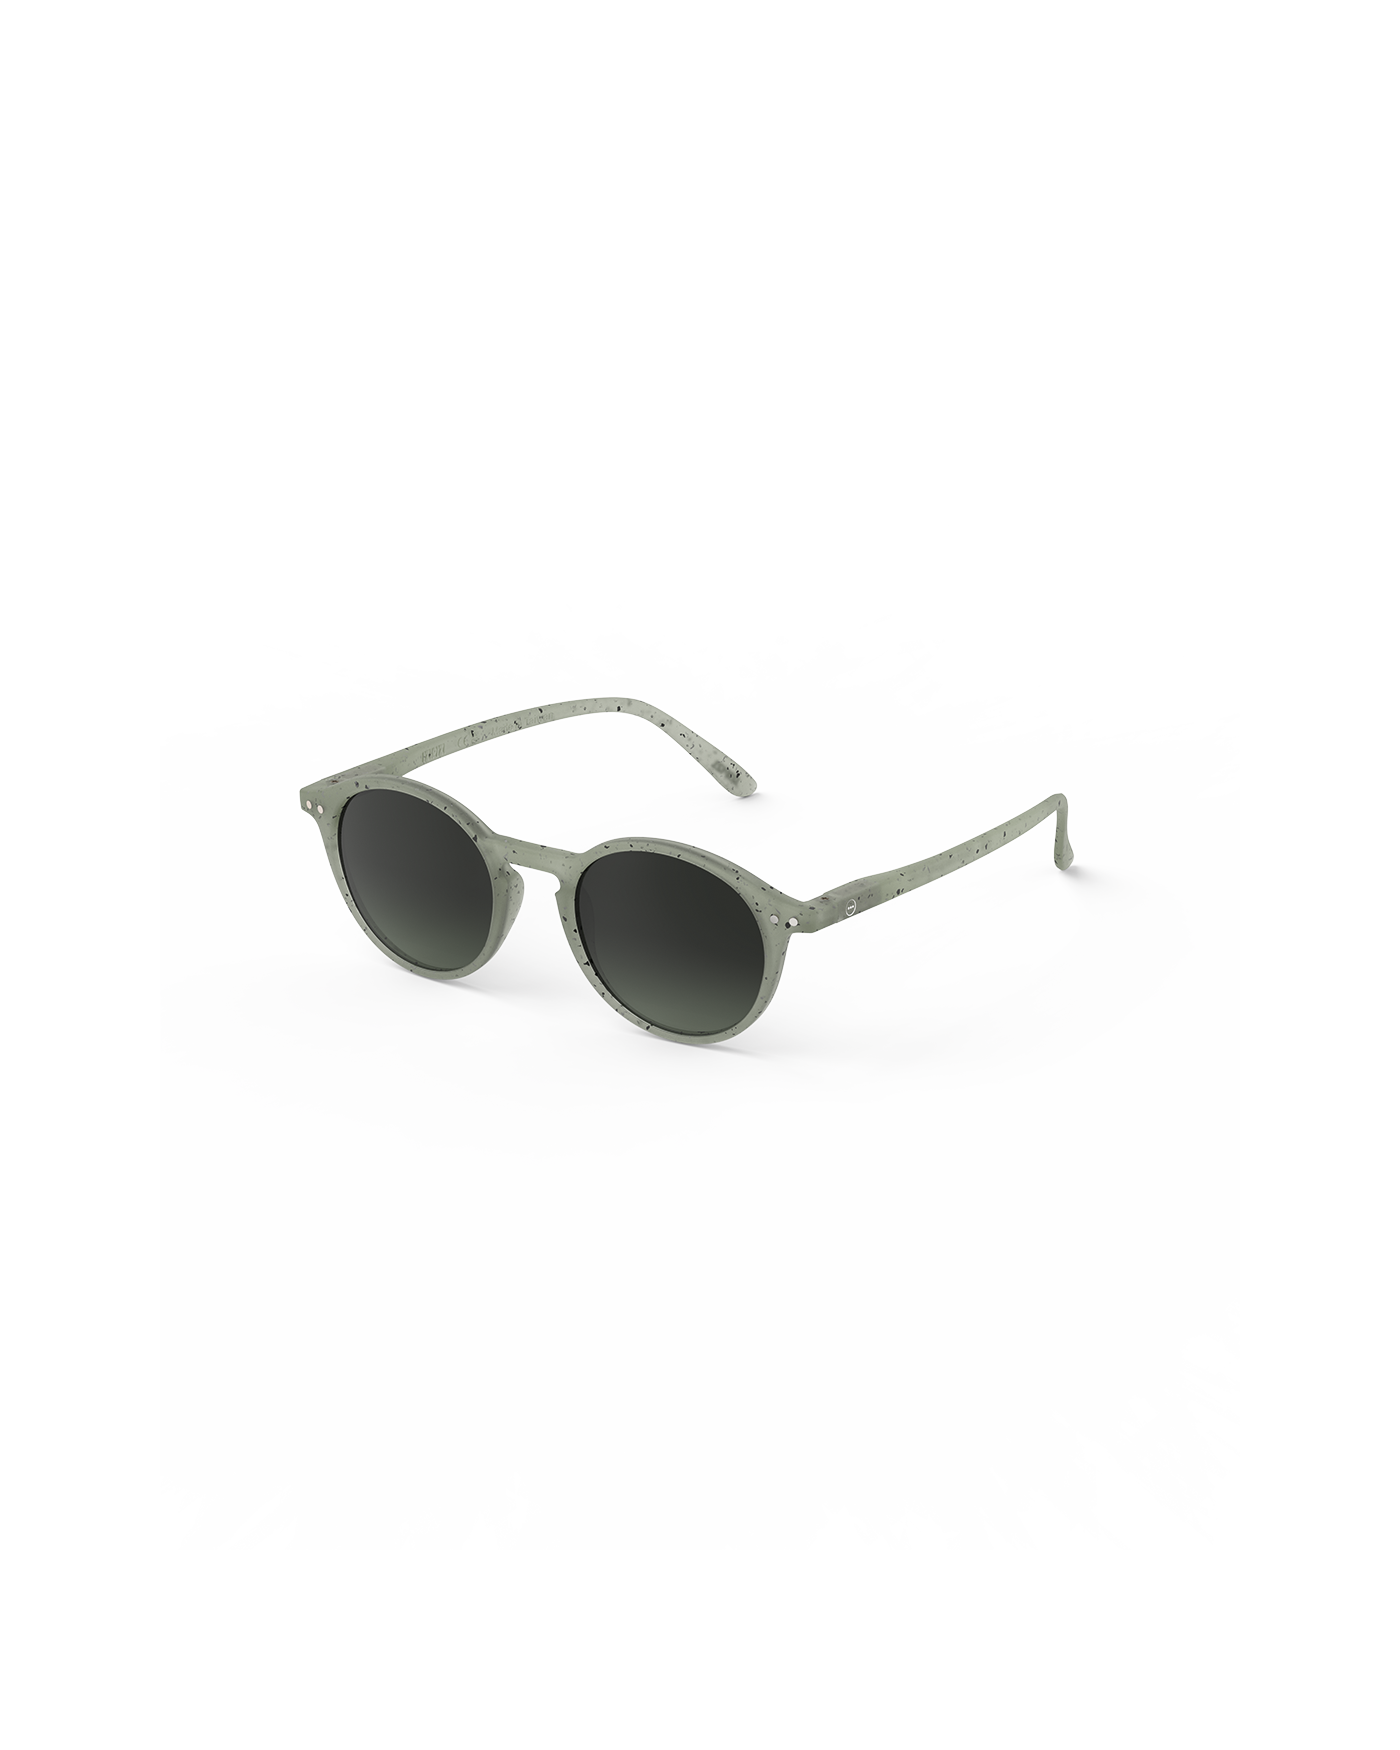 Sunglasses  - #D Dyed Green